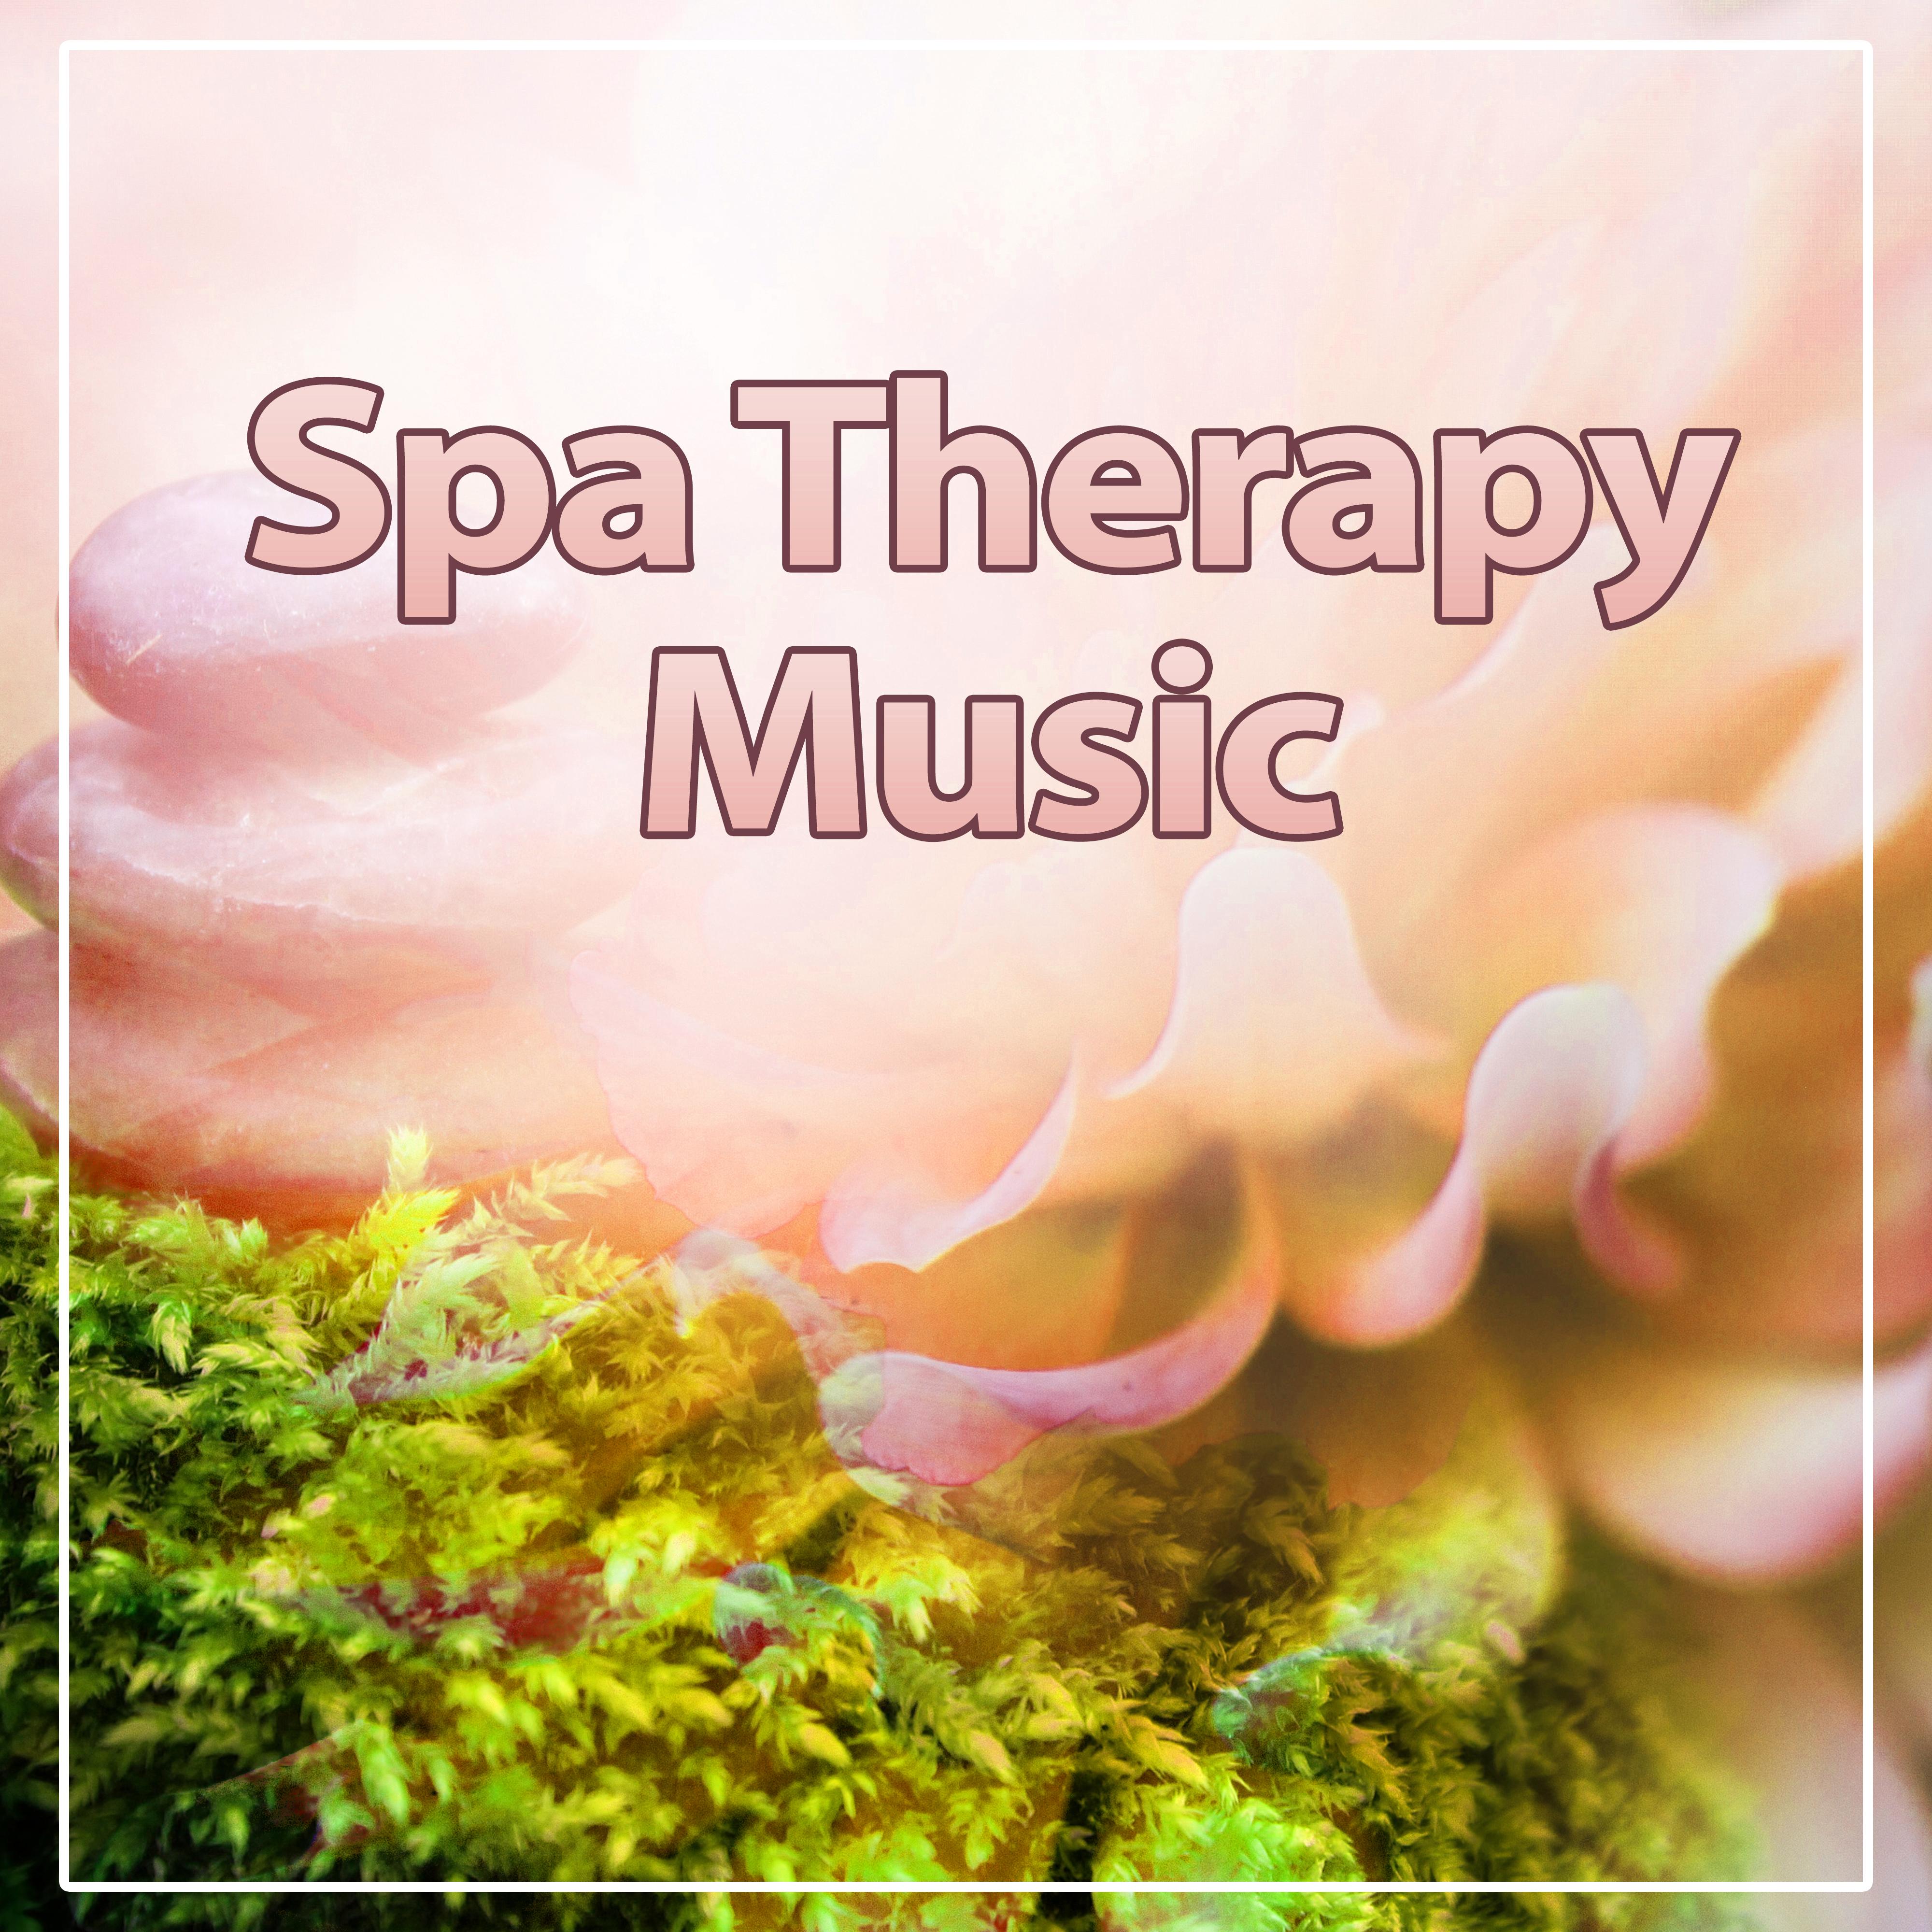 Spa Therapy Music – Nature Sounds, Spa Massage, Gentle Music, Silk Touch, Peaceful Music, Relax